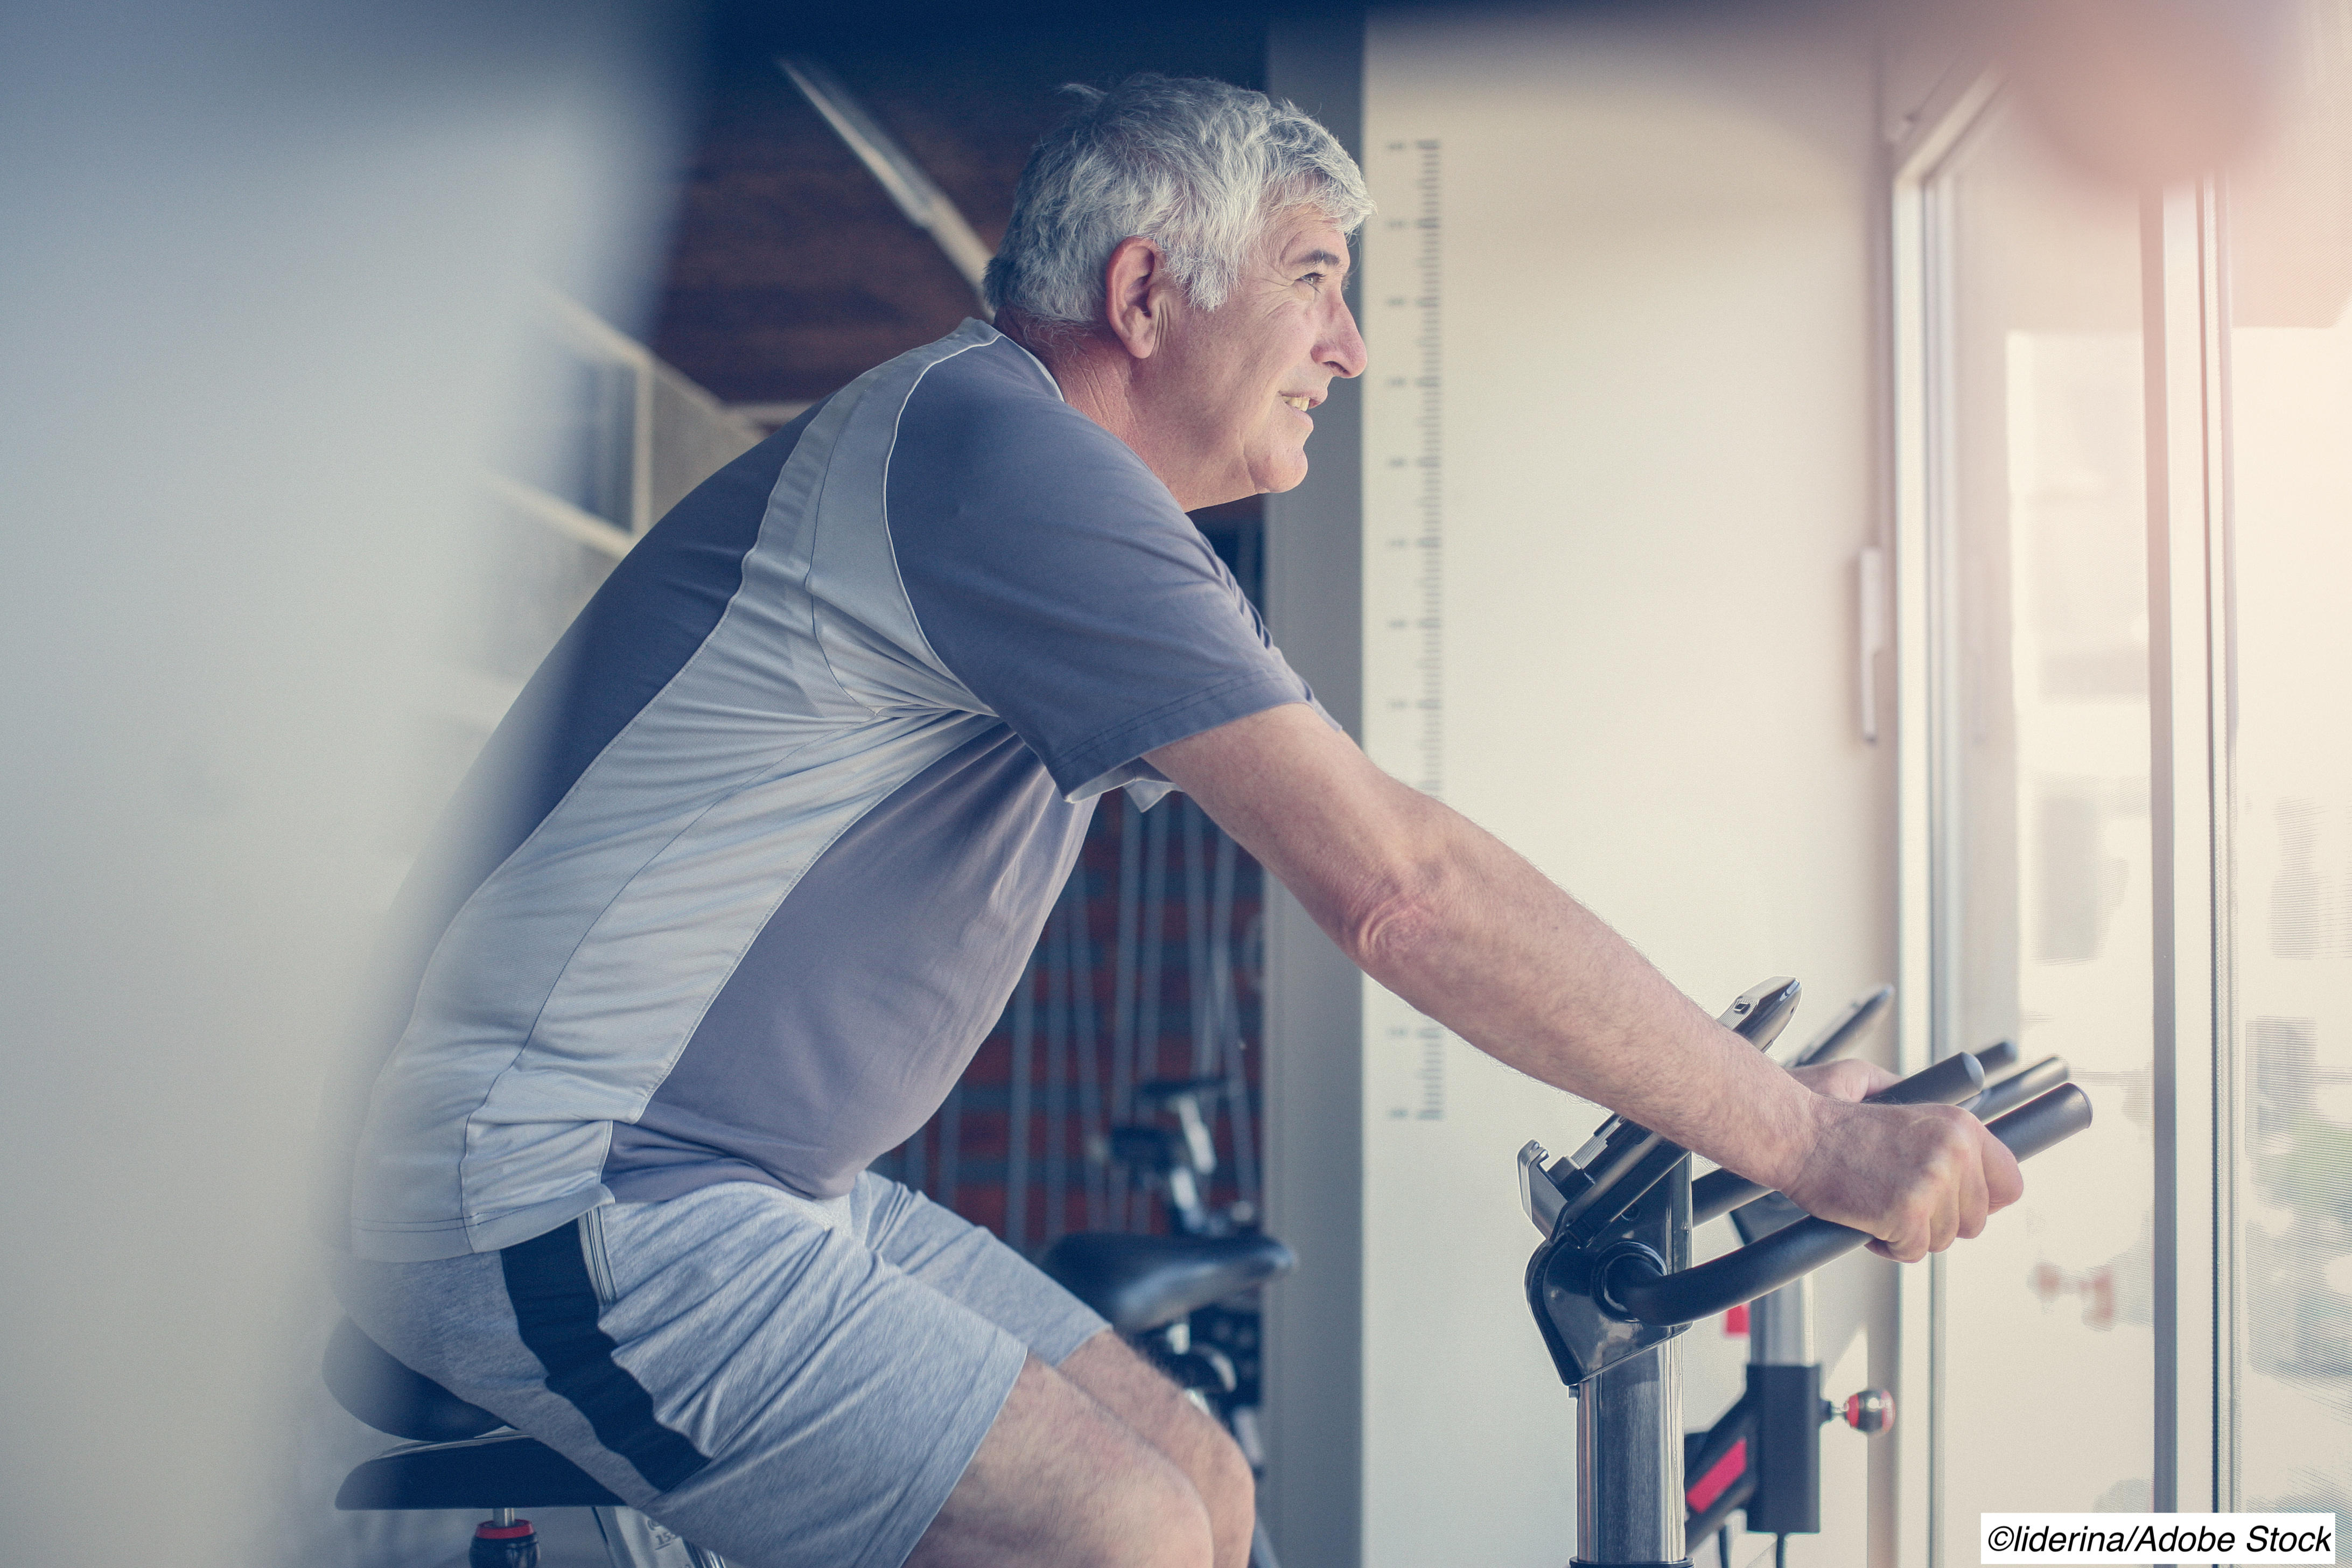 Increased Physical Activity Linked to Slower Decline in Early Parkinson’s